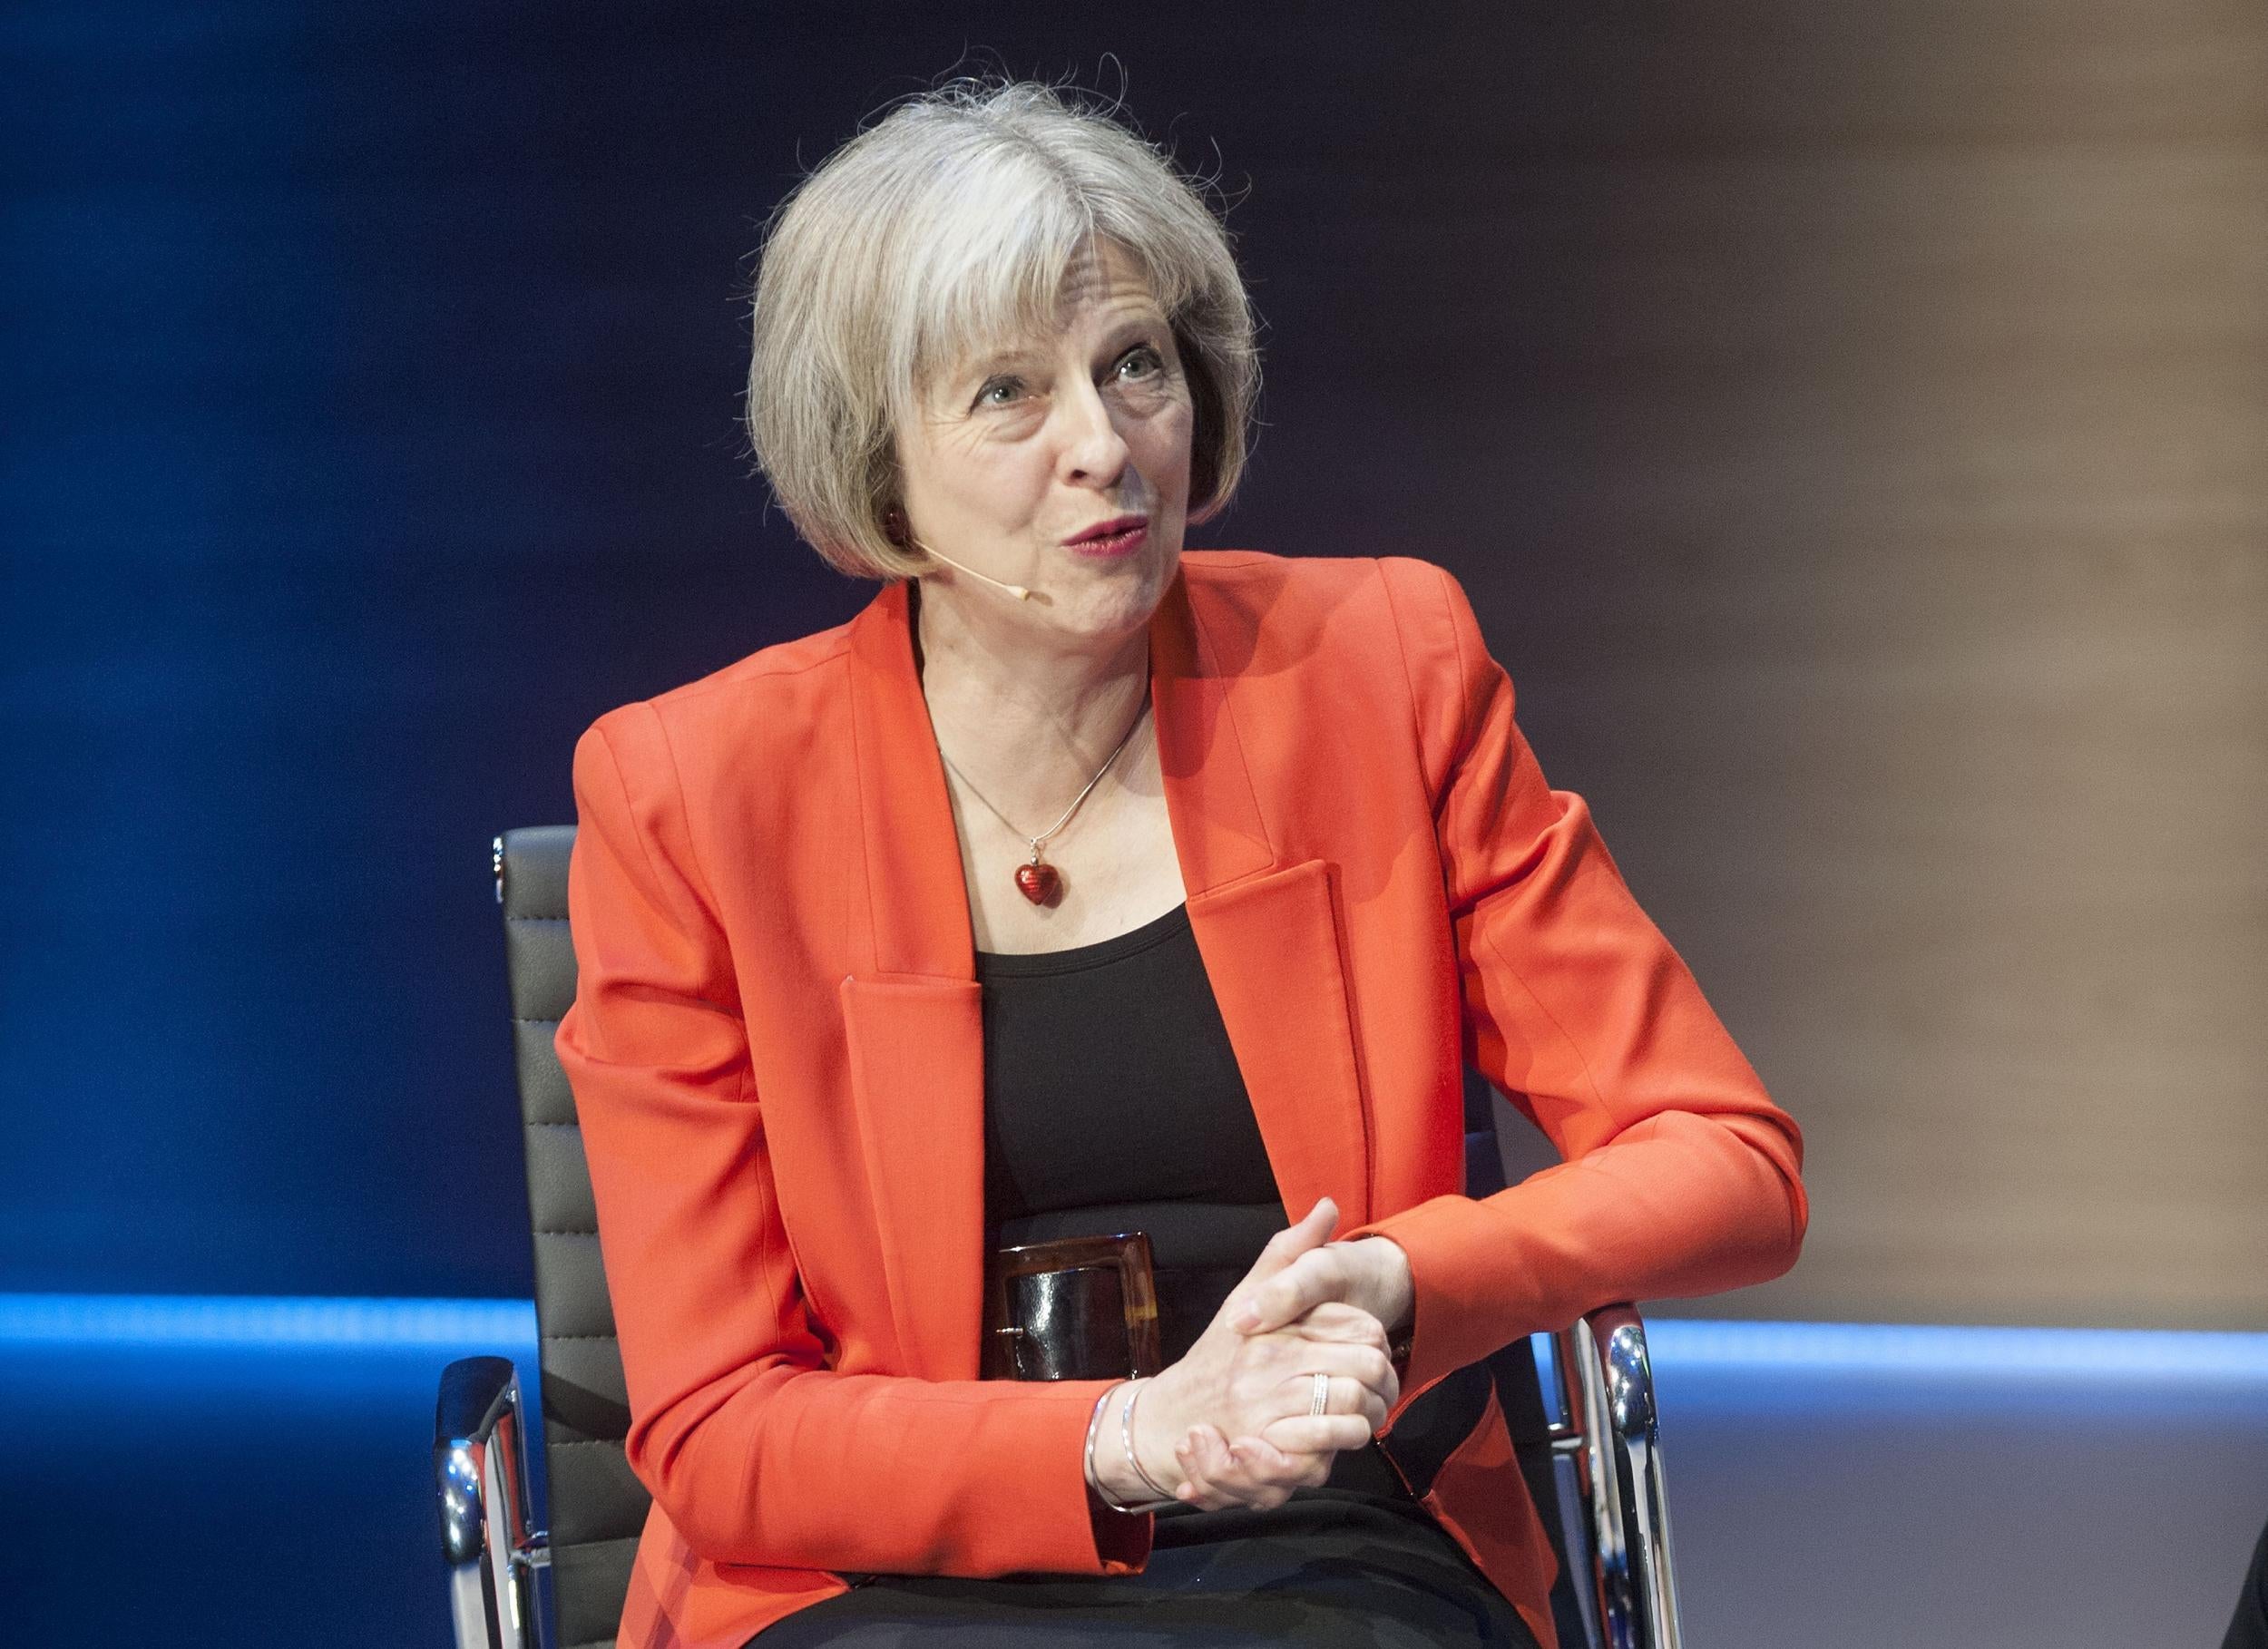 Theresa May is rumoured to be considering leading the Out campaign in the EU referendum